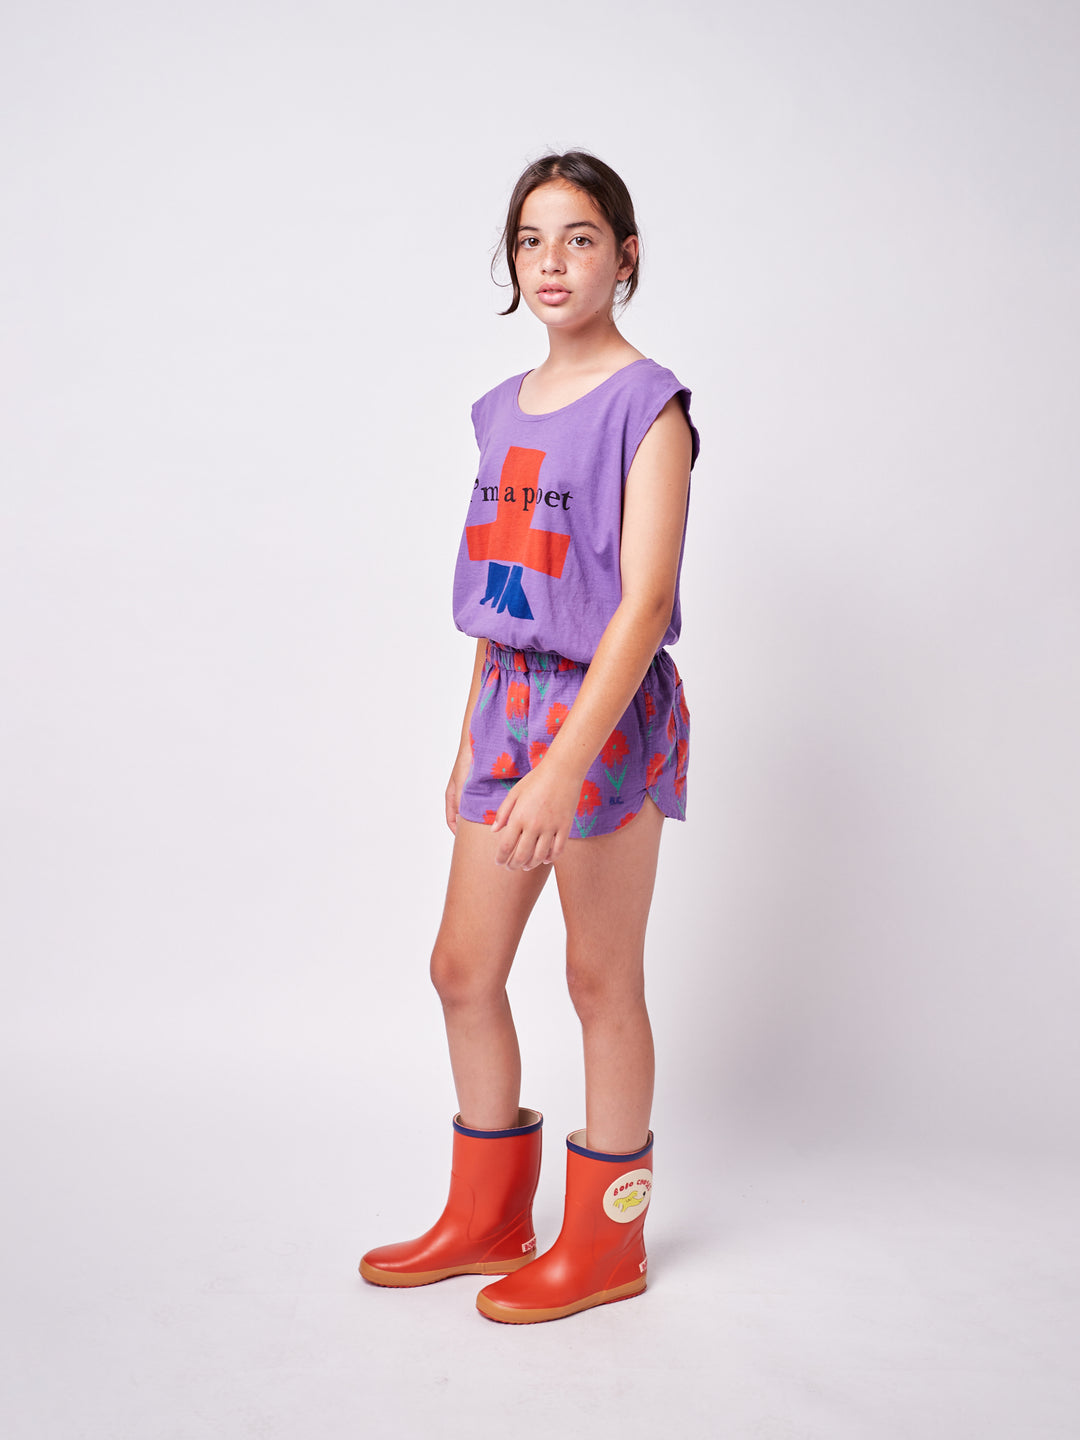 little girl posing wearing colorful printed pants and purple boxy tank top with graphic print and ''I'm a poet'' text